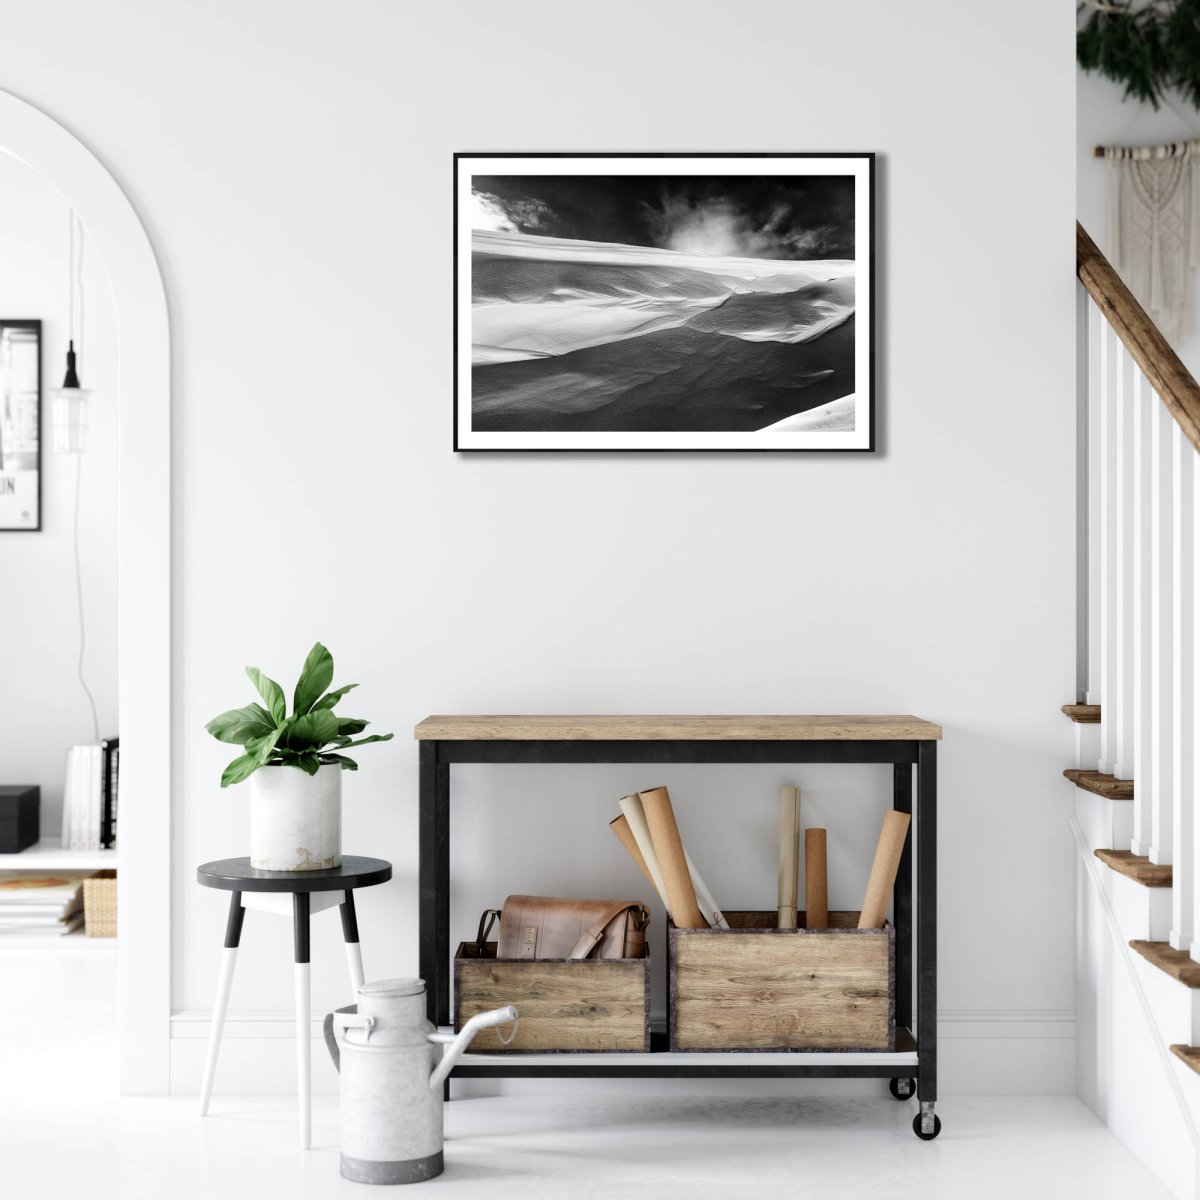 Framed black and white photo of wind-sculpted snowy ravine wall in Arctic wilderness, white living room wall.